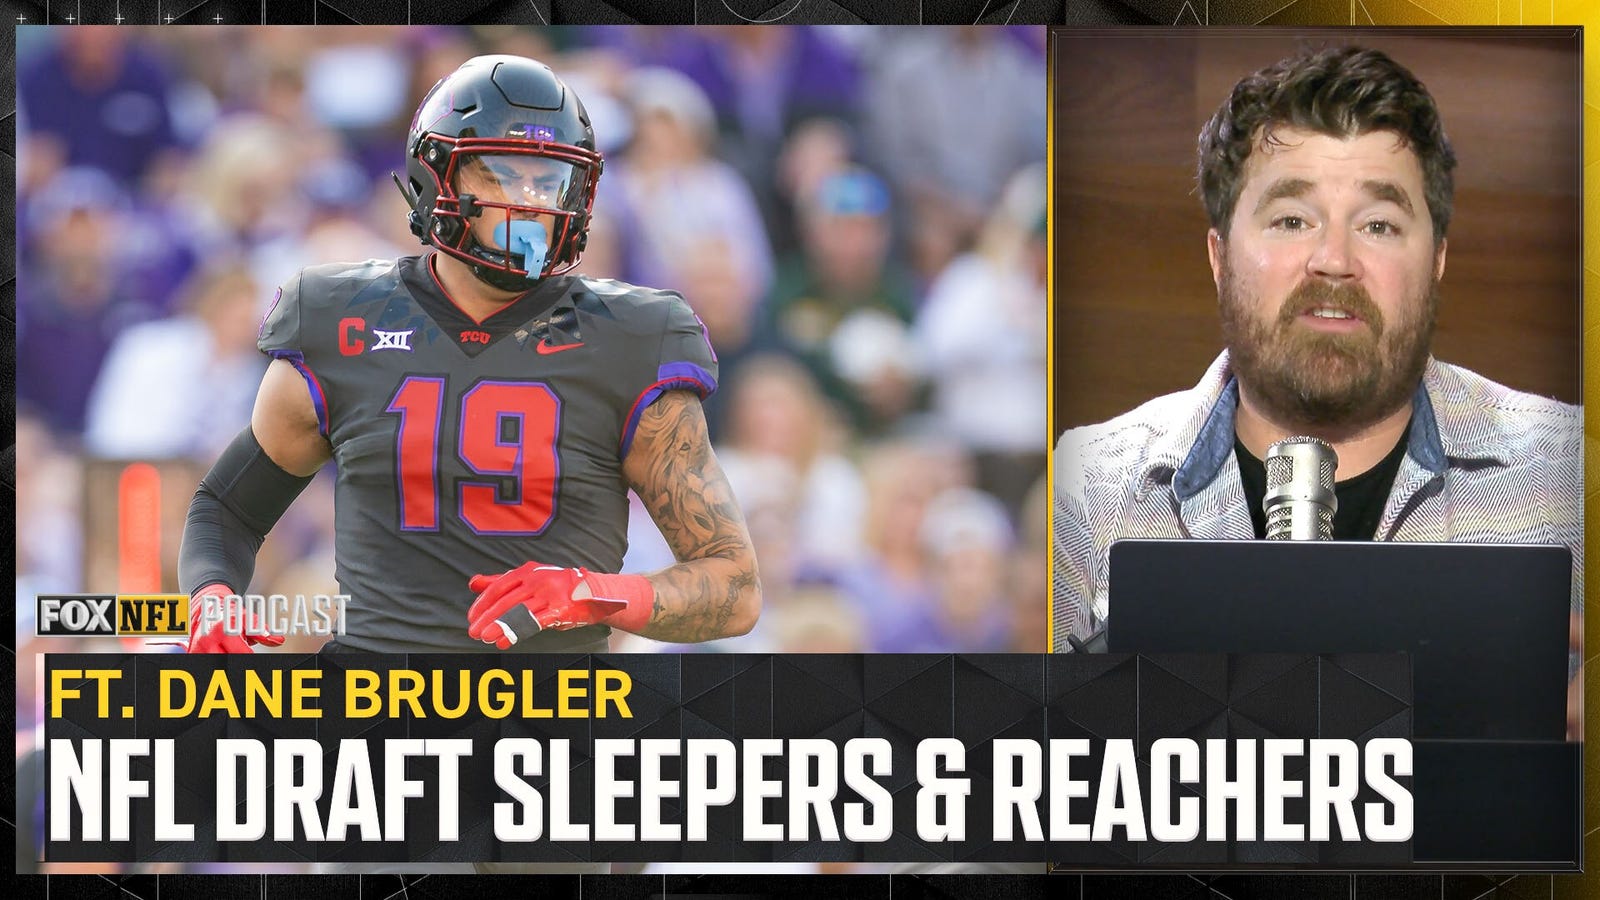 Biggest NFL Draft sleepers and reaches